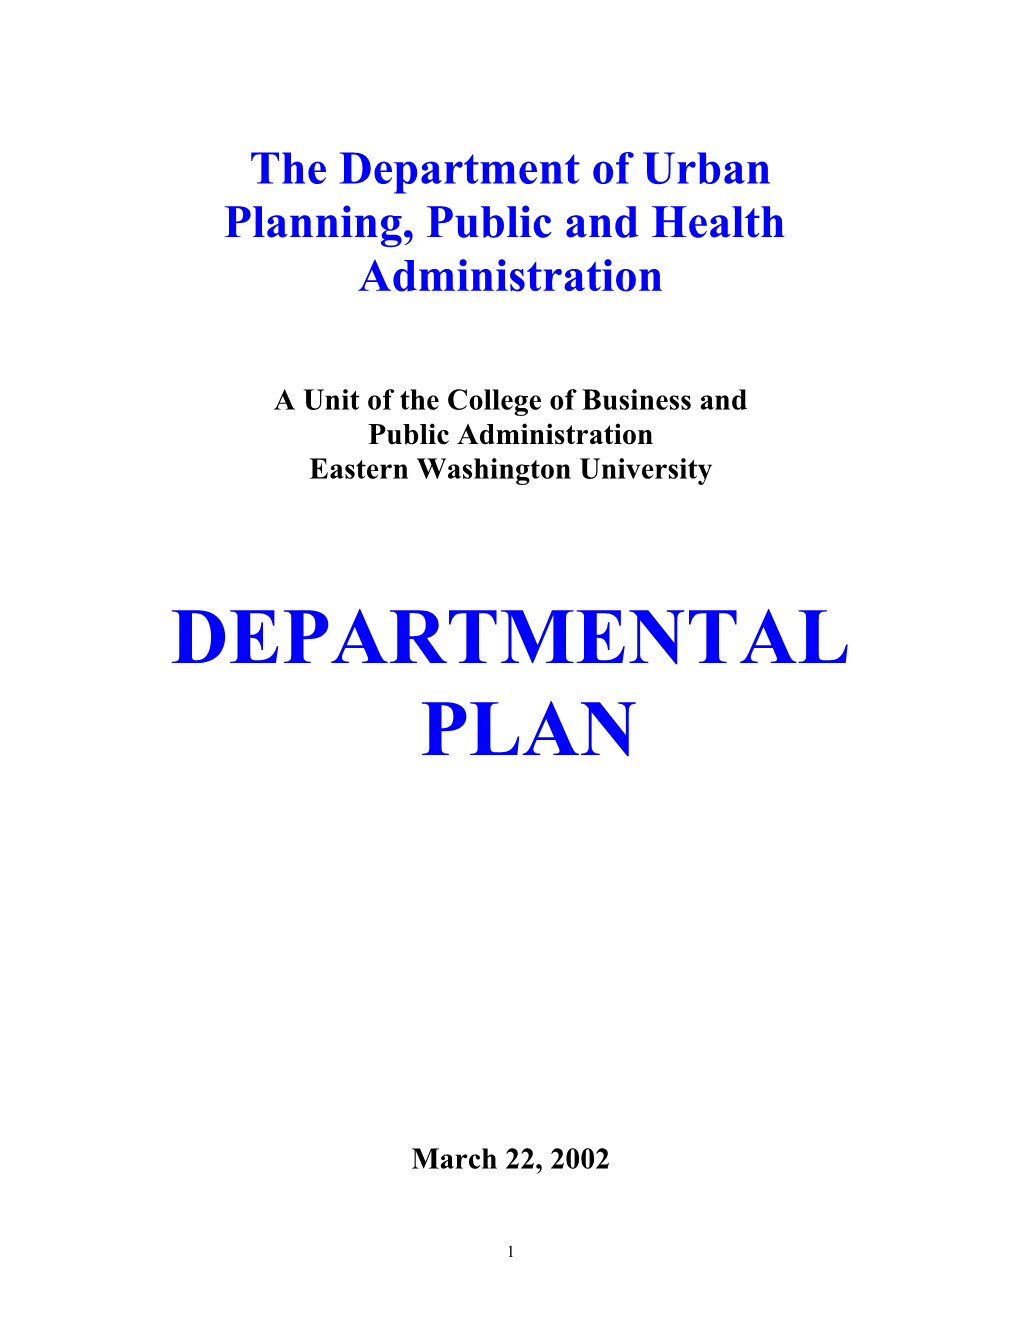 The Department of Urban Planning, Public and Health Administration